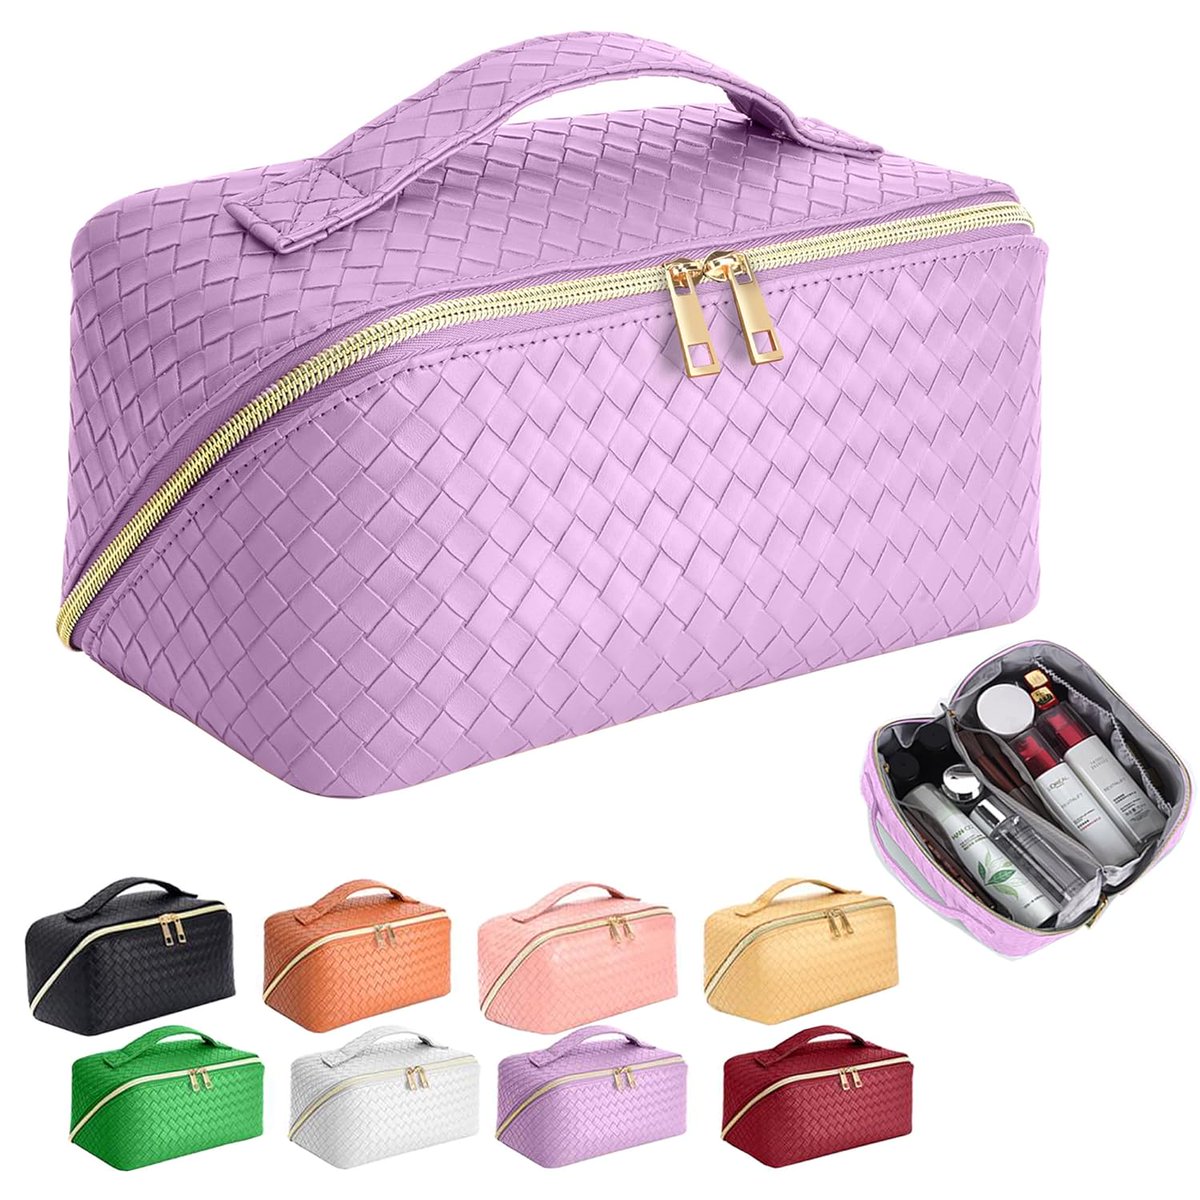 ✨ Organize Your Beauty Essentials: Large Capacity Travel Cosmetic Bag $15.99 (Orig. $19.99) 💸 Clip 20%

🔗 amzn.to/3VyqbS0  

#CosmeticBag #TravelEssentials #AmazonDeal #BeautyProducts